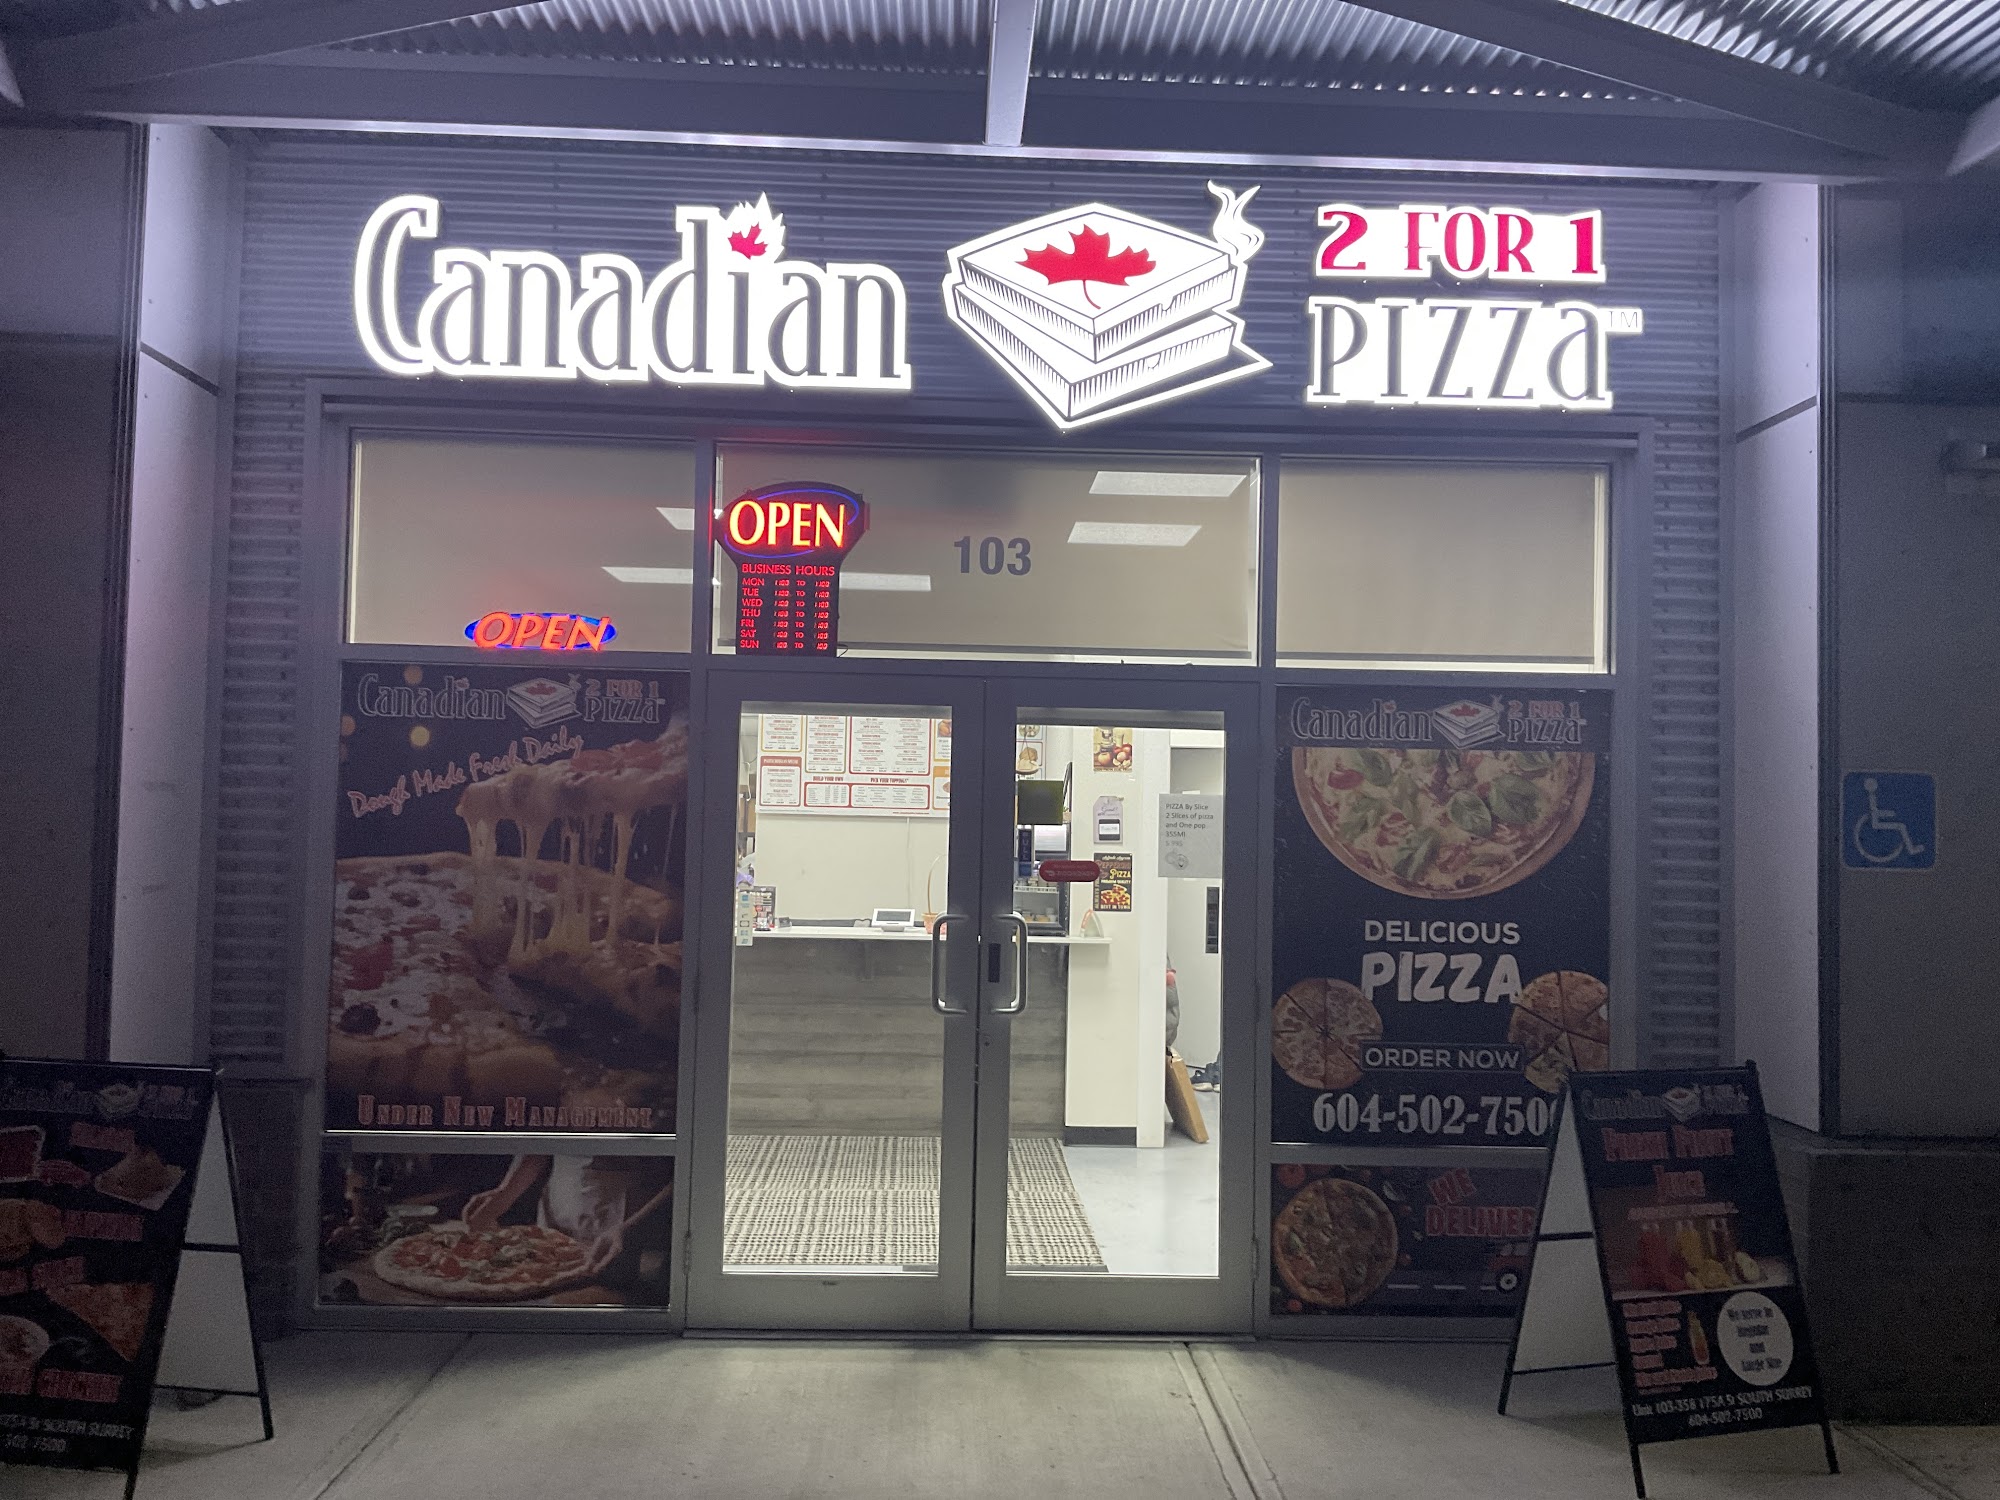 Canadian 2 for 1 Pizza - South Surrey